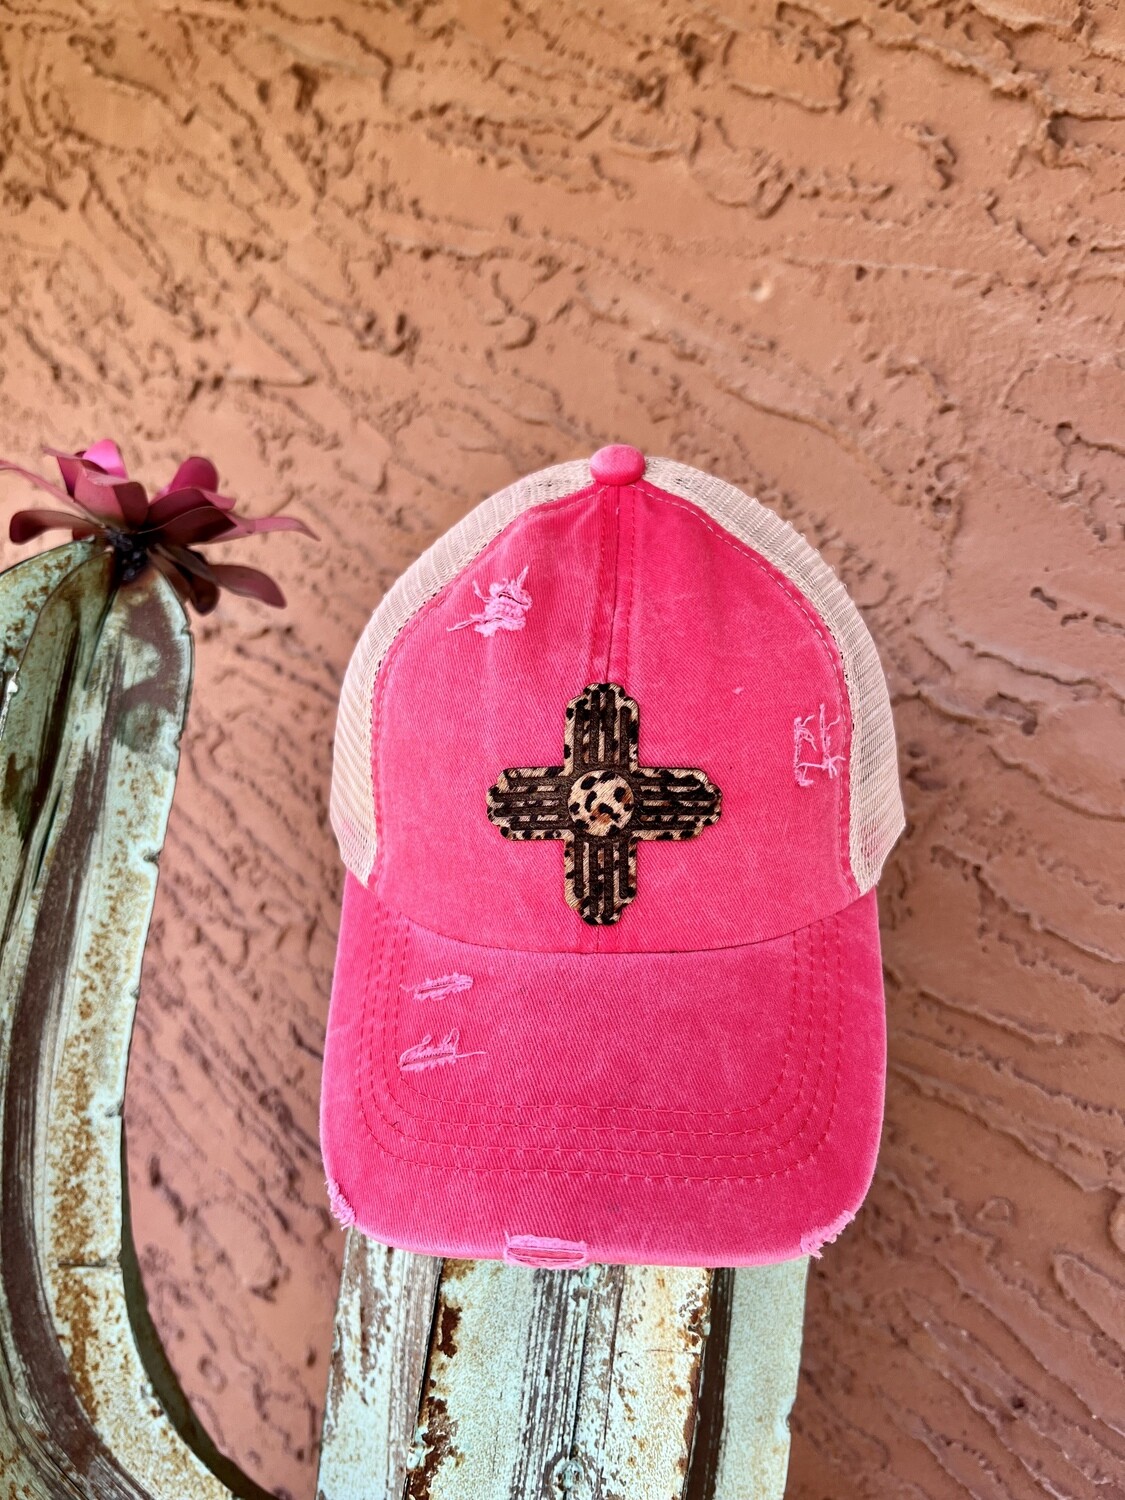 Coral Criss Cross Ponytail Hat with Cheetah Hide Zia Patch 